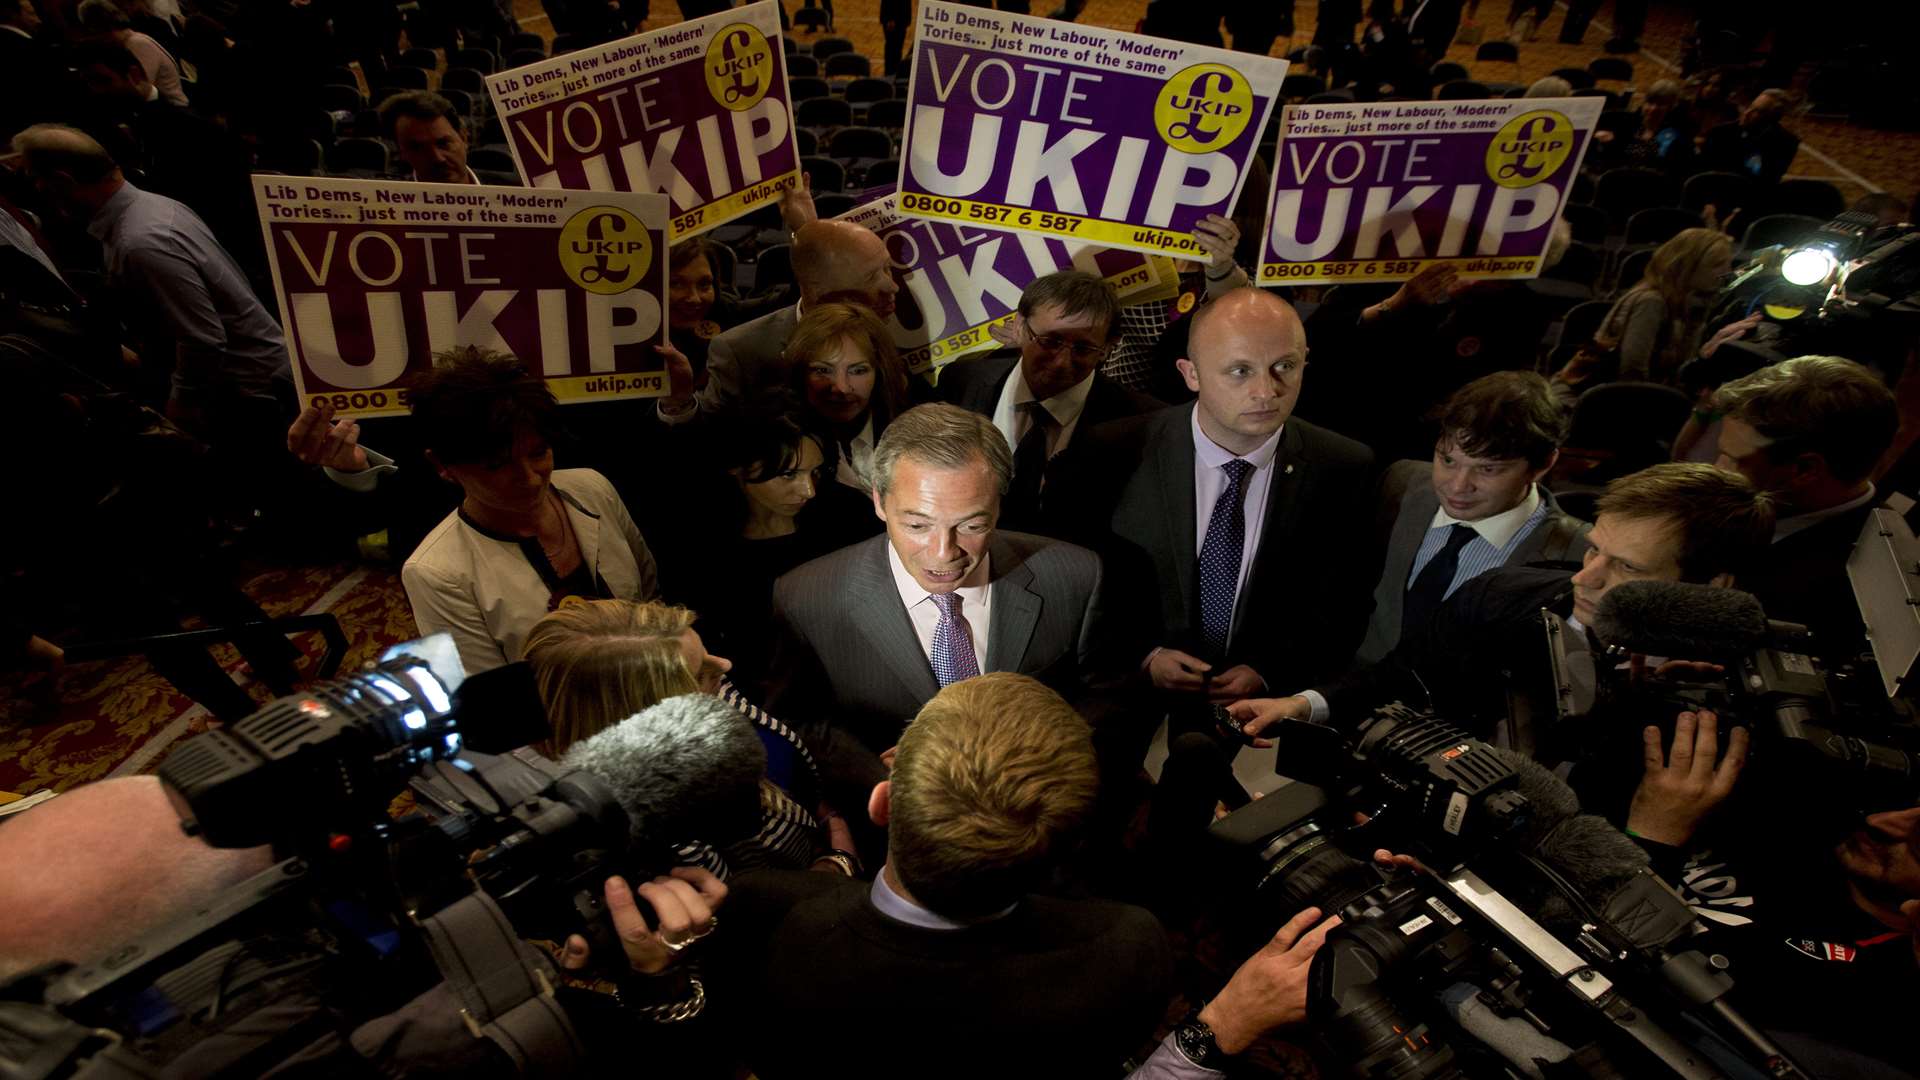 Nigel Farage at the centre of a media scrum after his party's victory. Picture: Jon Rowley/SWNS.com